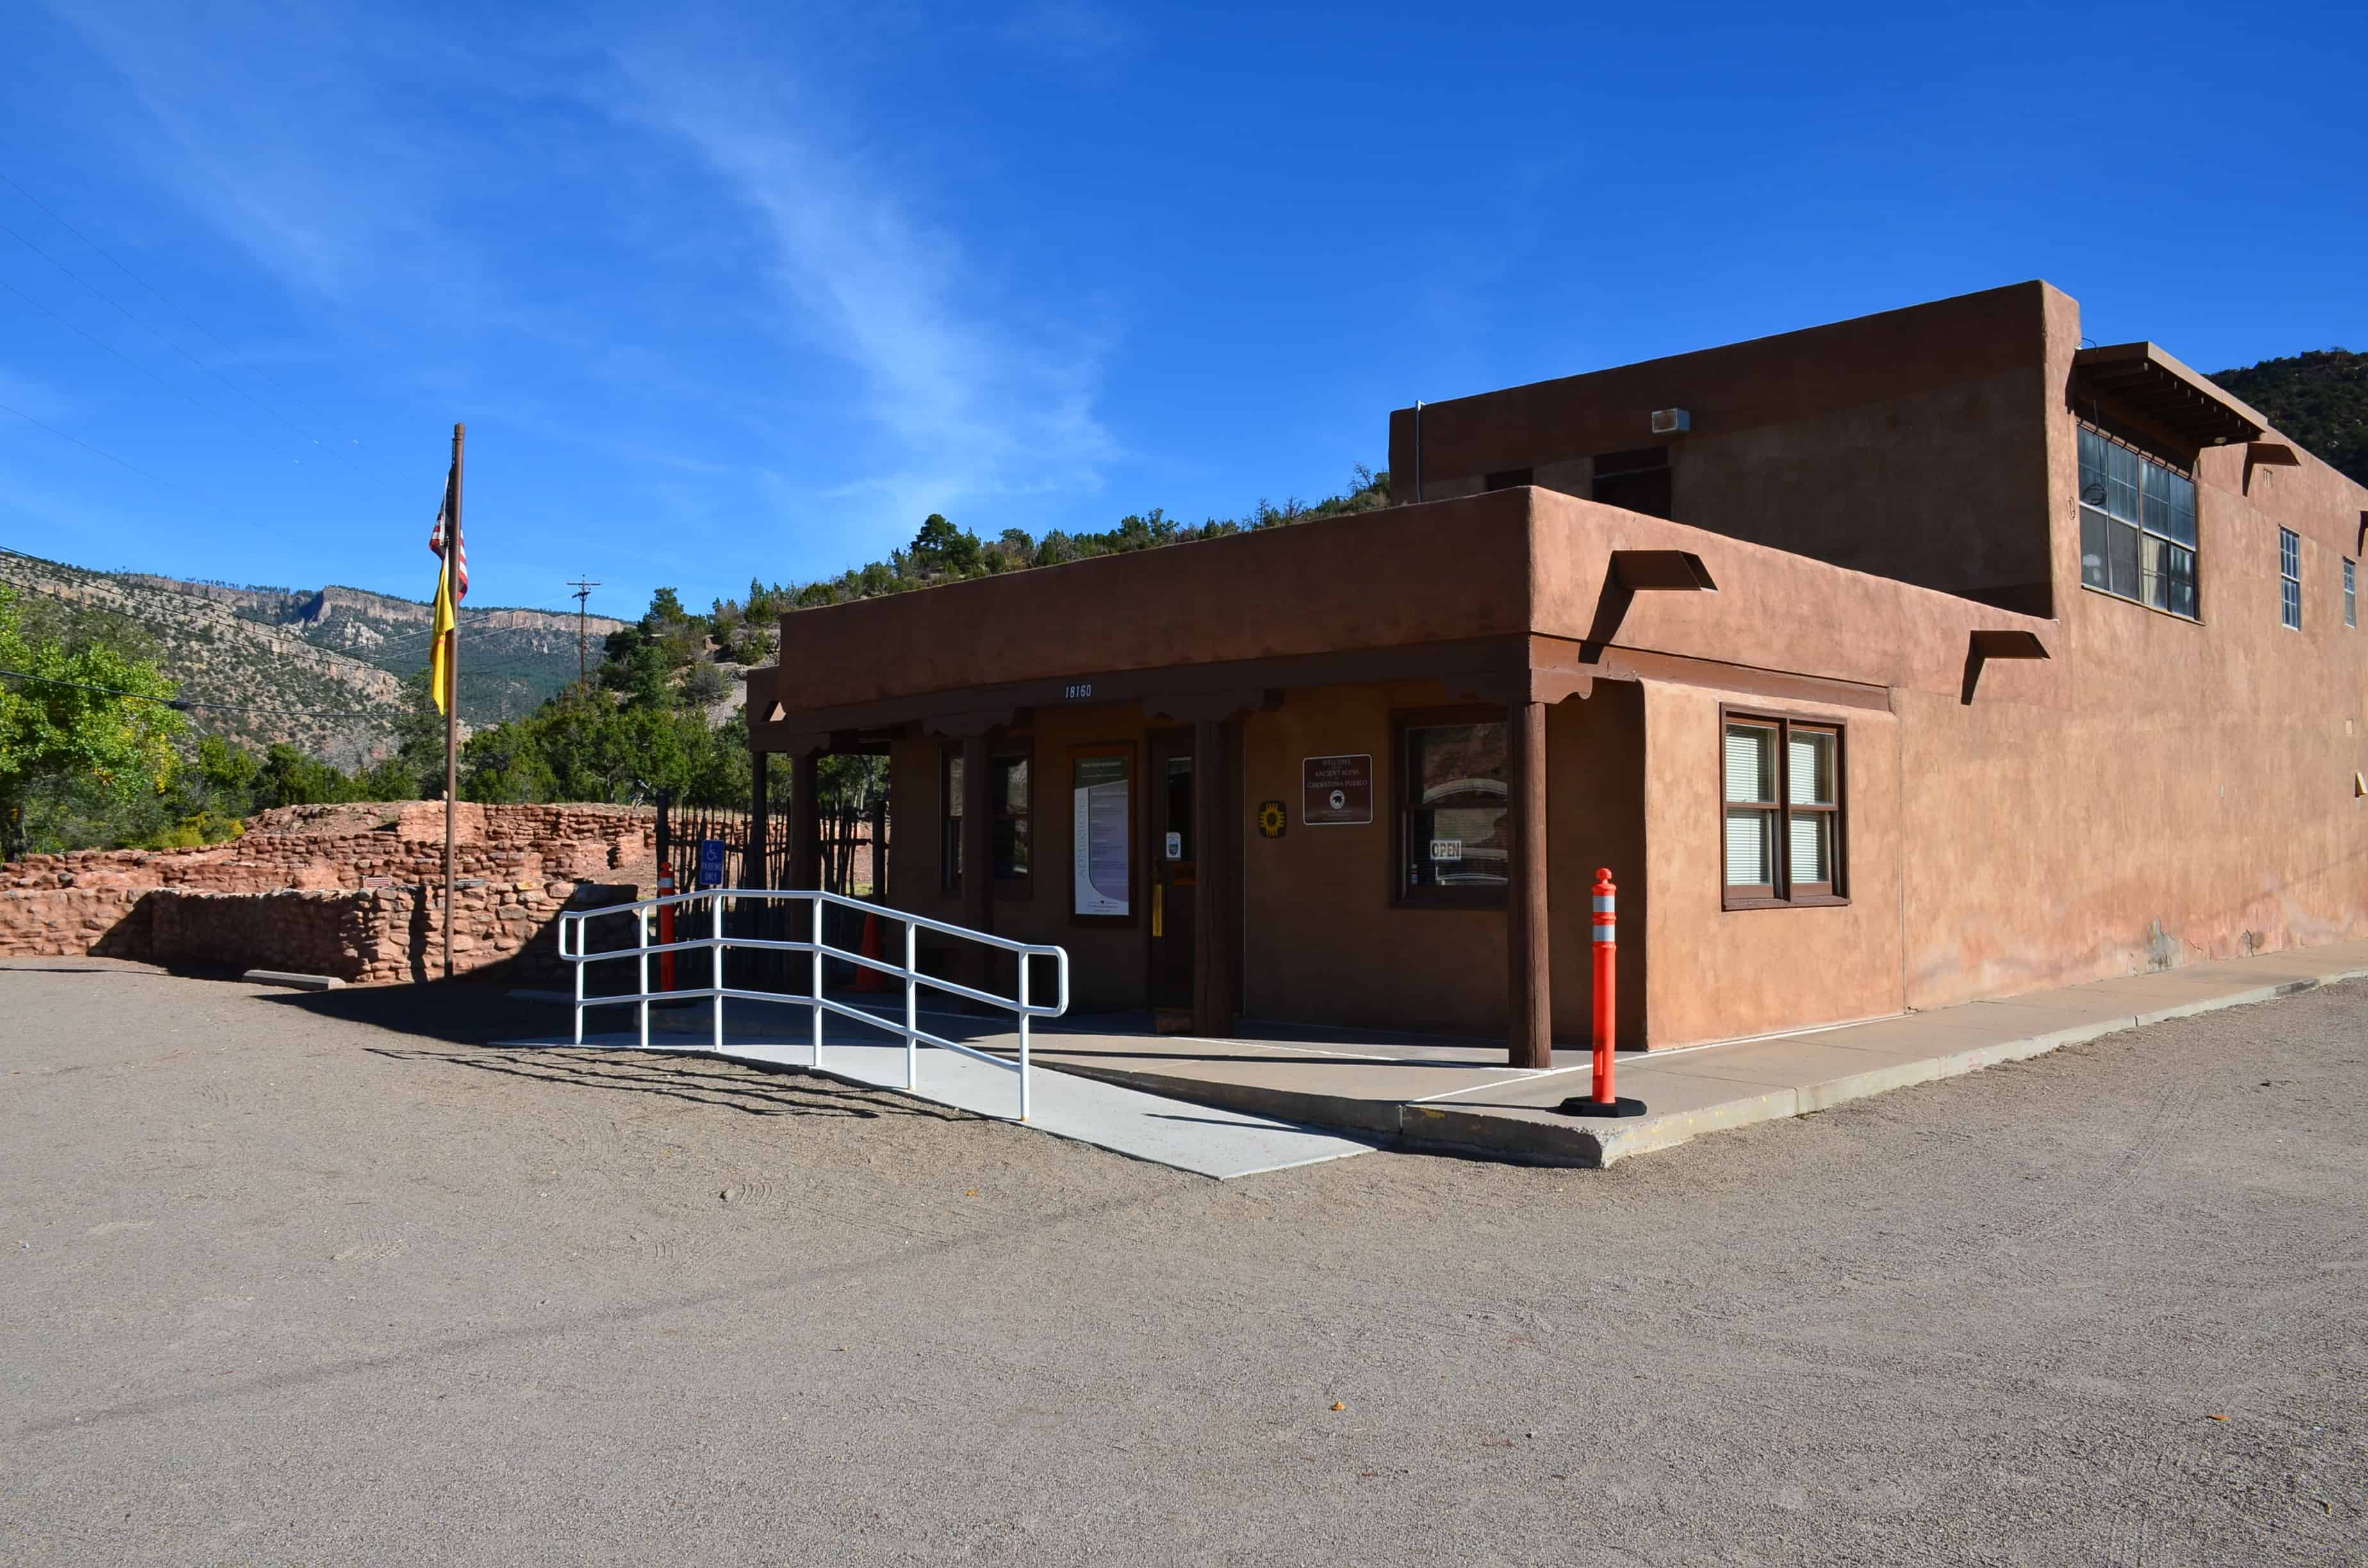 Visitor center and museum at Jemez Historic Site in Jemez Springs, New Mexico